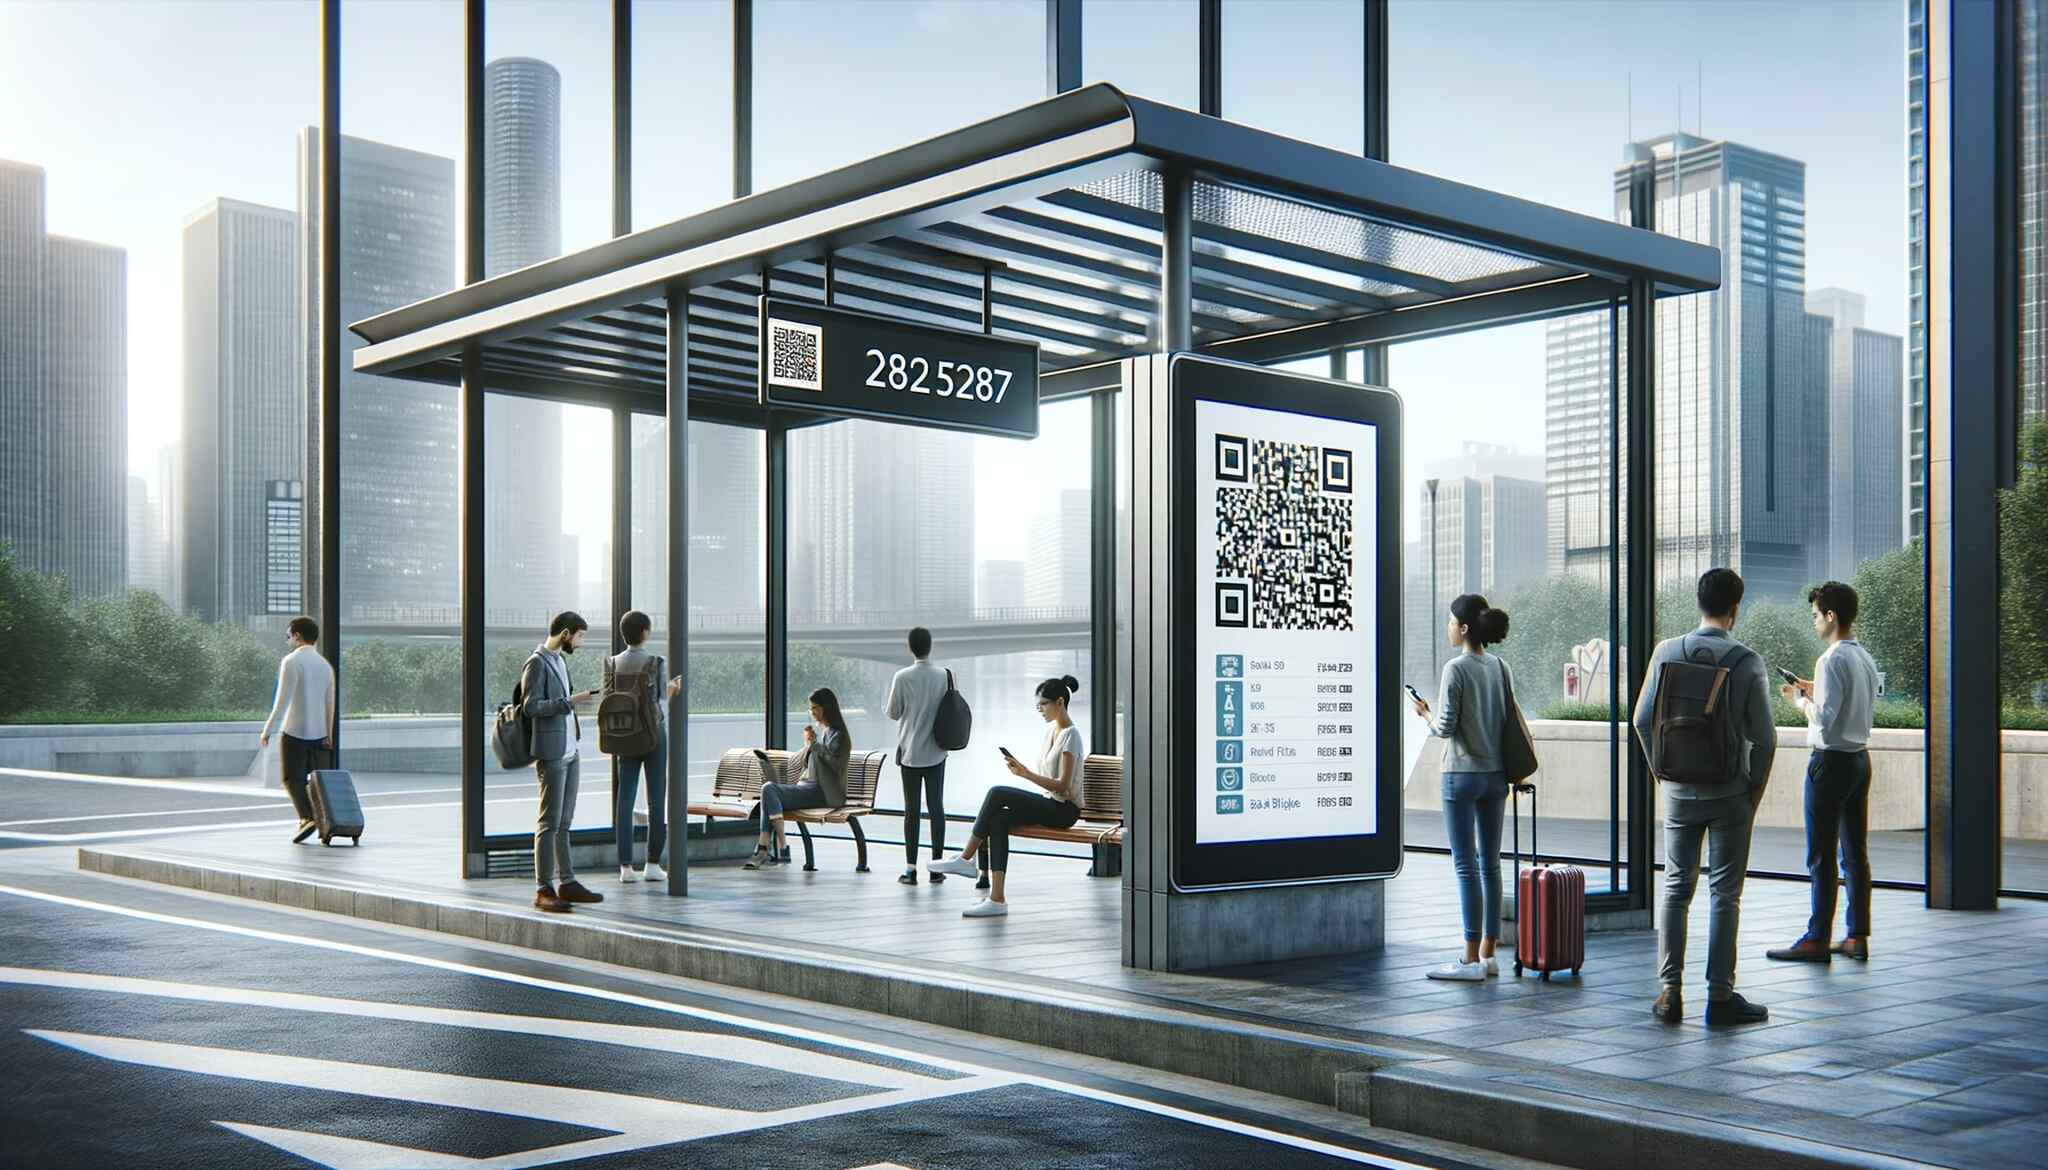 A modern and clean bus stop in an urban setting, with a digital display showing a large, easily scannable QR code